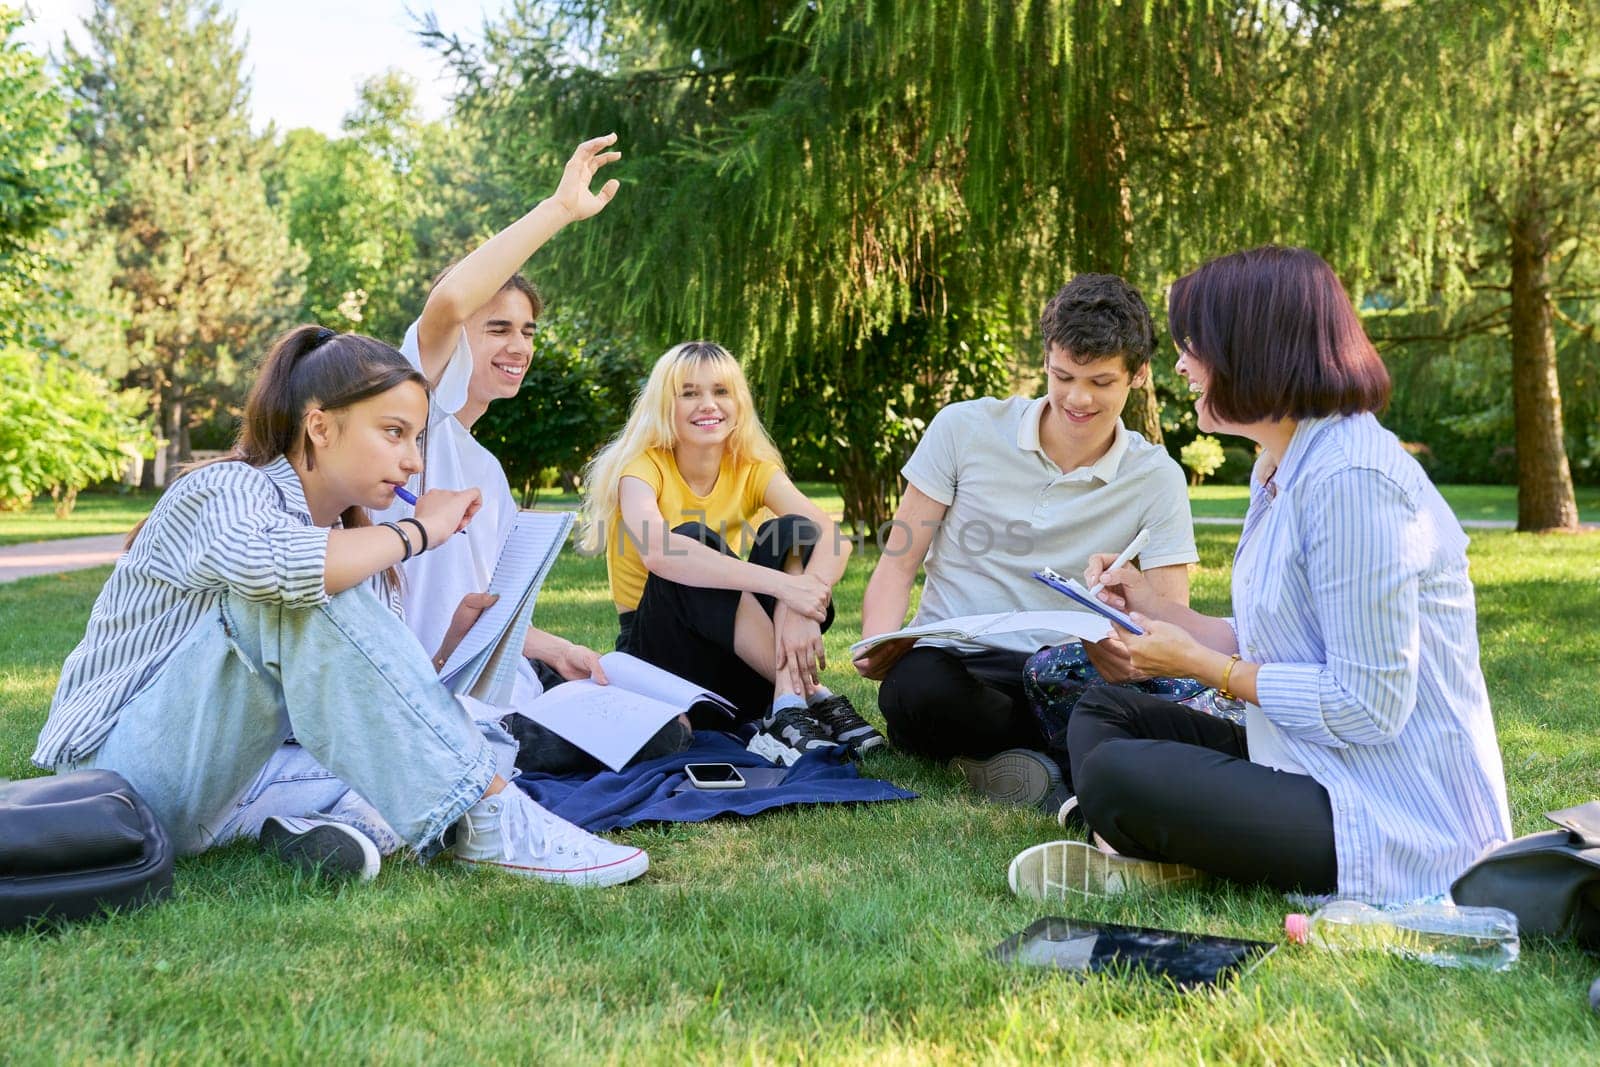 Group of high school students with female teacher, outdoor on campus lawn. Education, college, training, teenagers concept